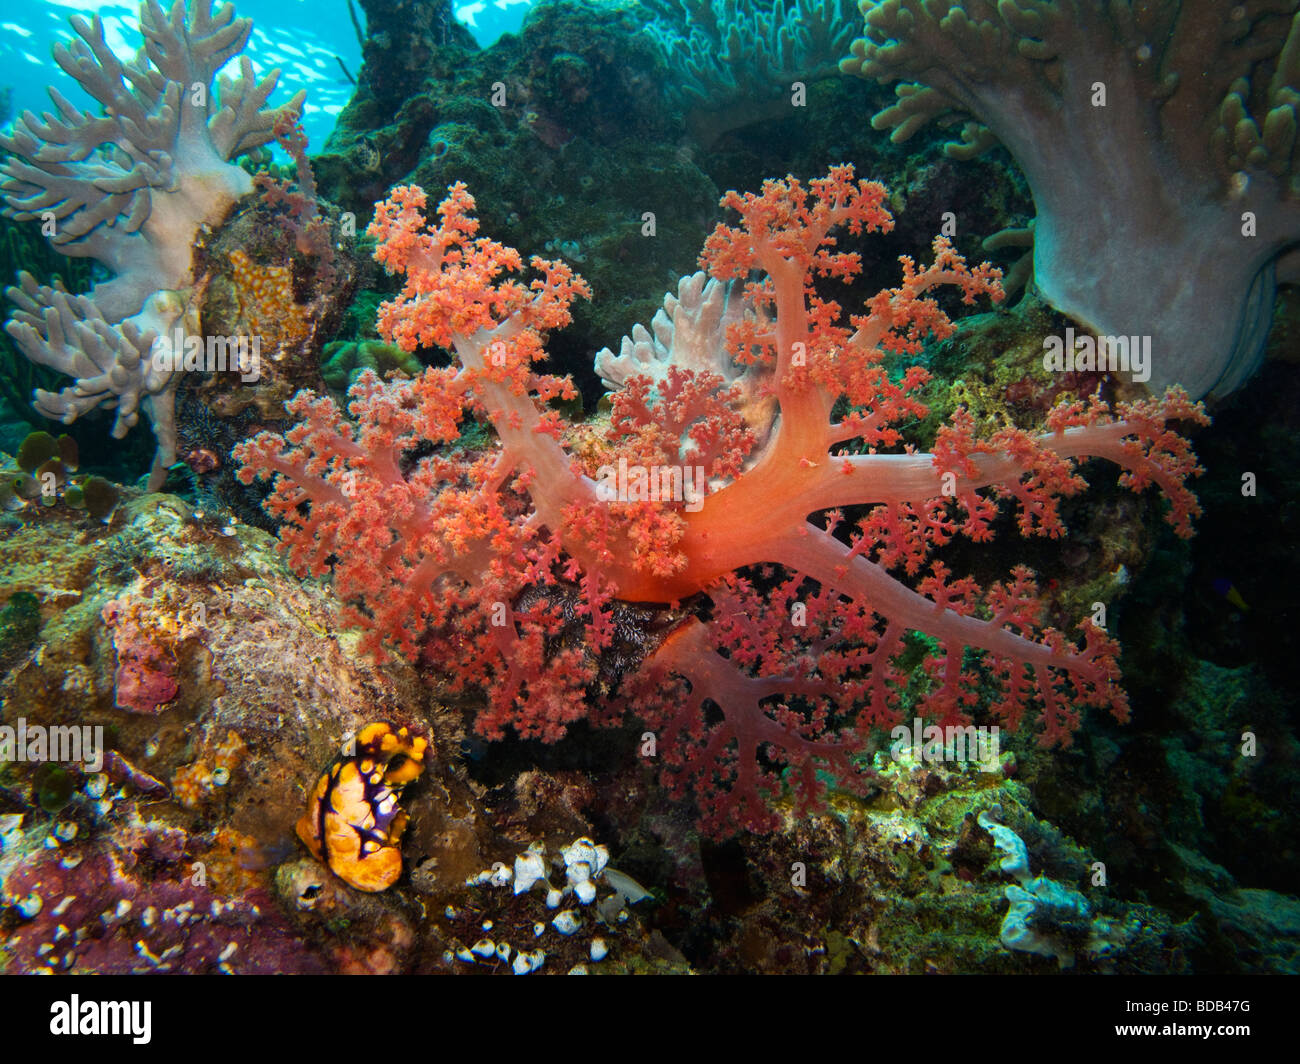 Indonesia Sulawesi Wakatobi National Park underwater colourful red soft coral Dendronephthya sp Stock Photo